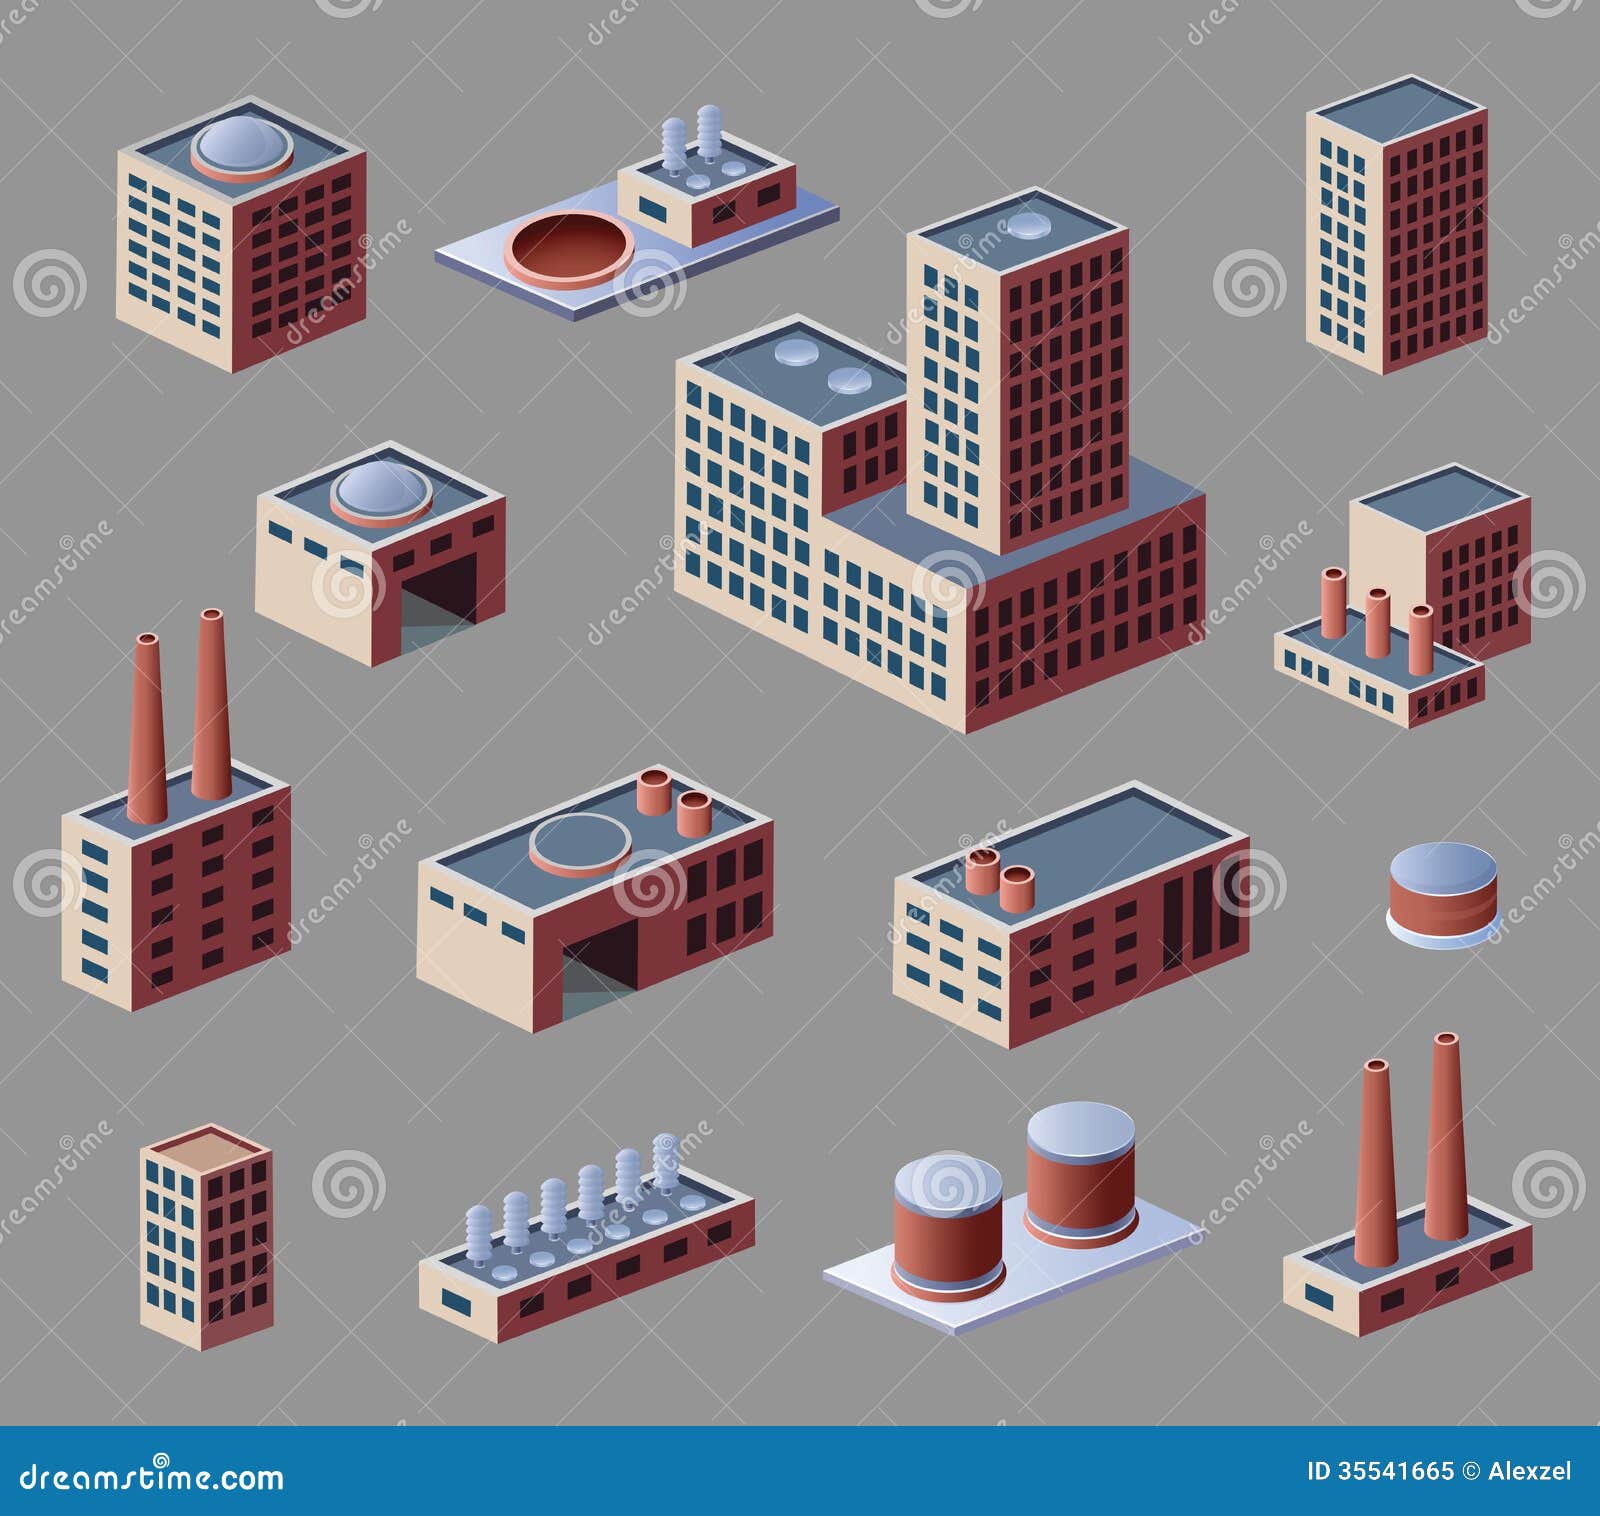 industrial clipart free download - photo #16